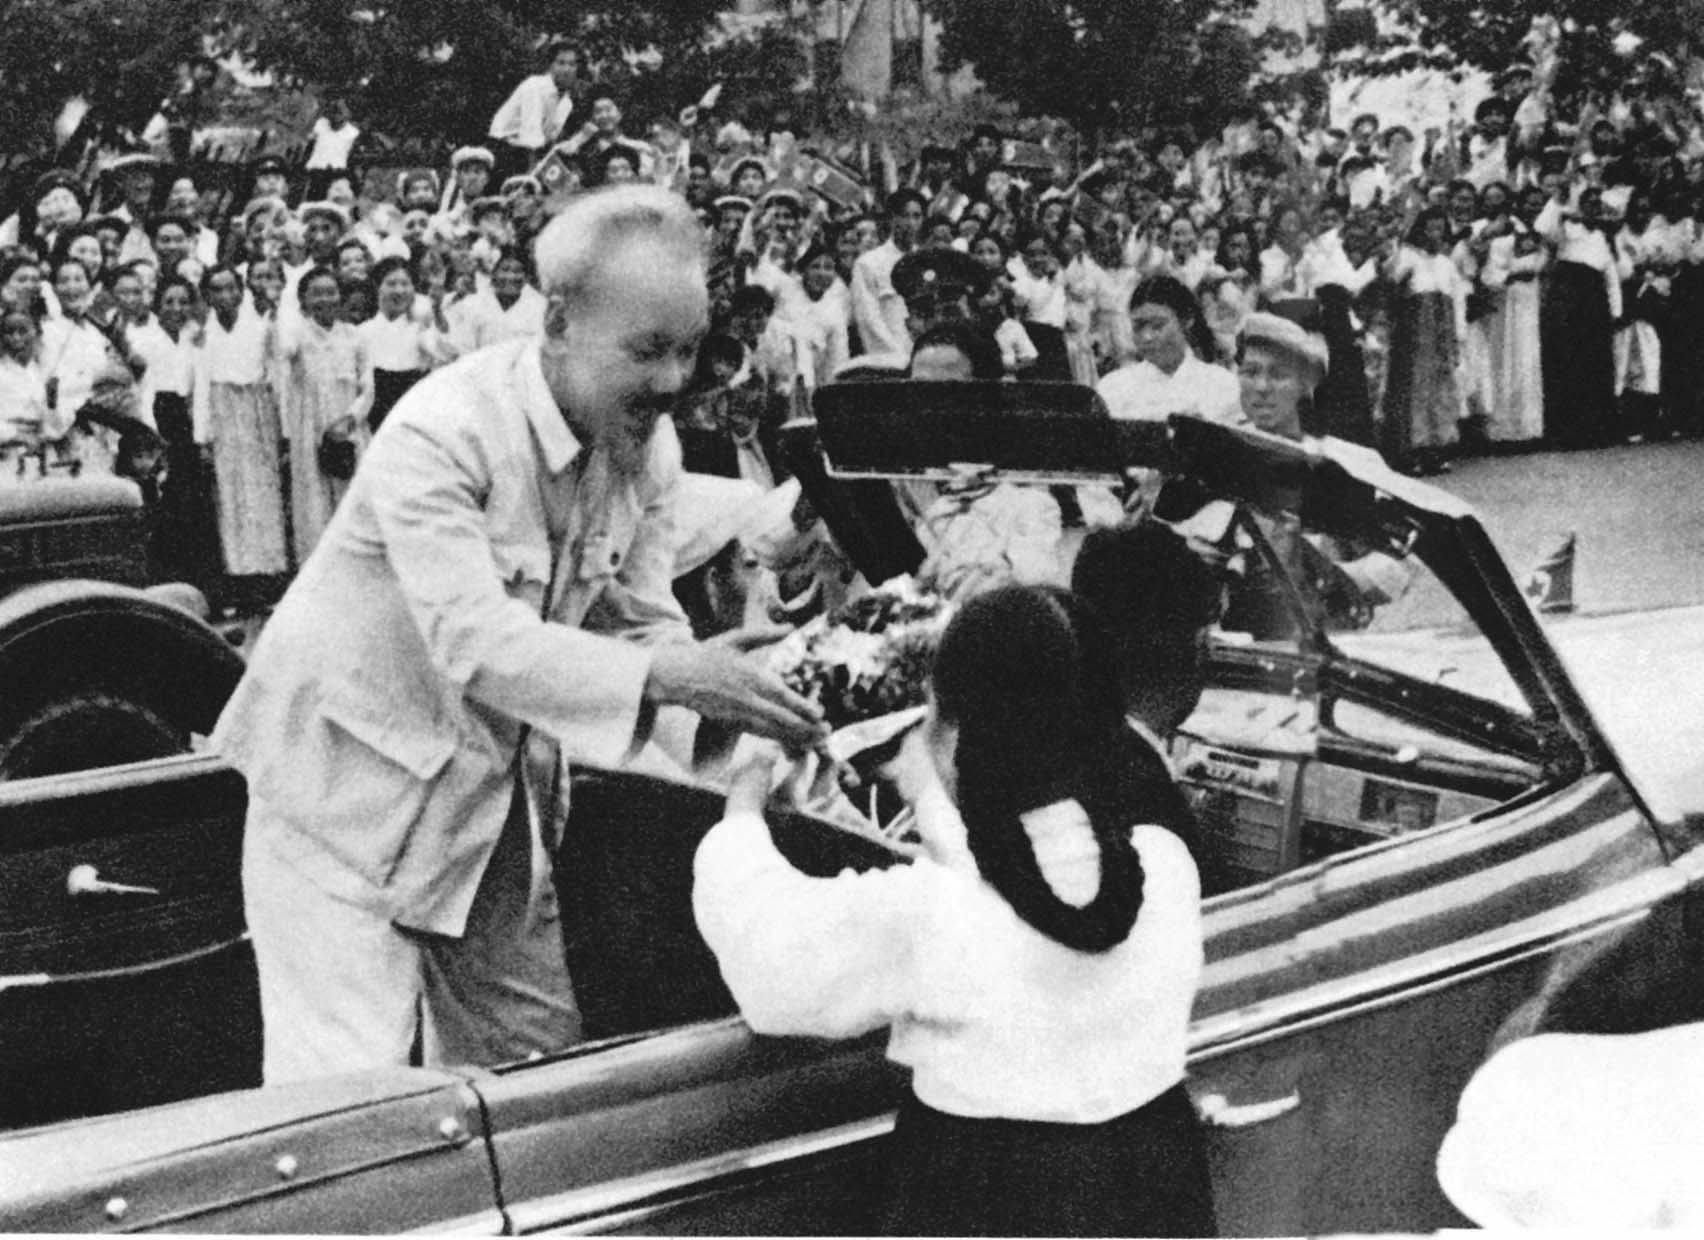 The people of Pyongyang Capital City welcome President Ho Chi Minh visiting the People’s Democratic Republic of Korea (July 8th, 1957)